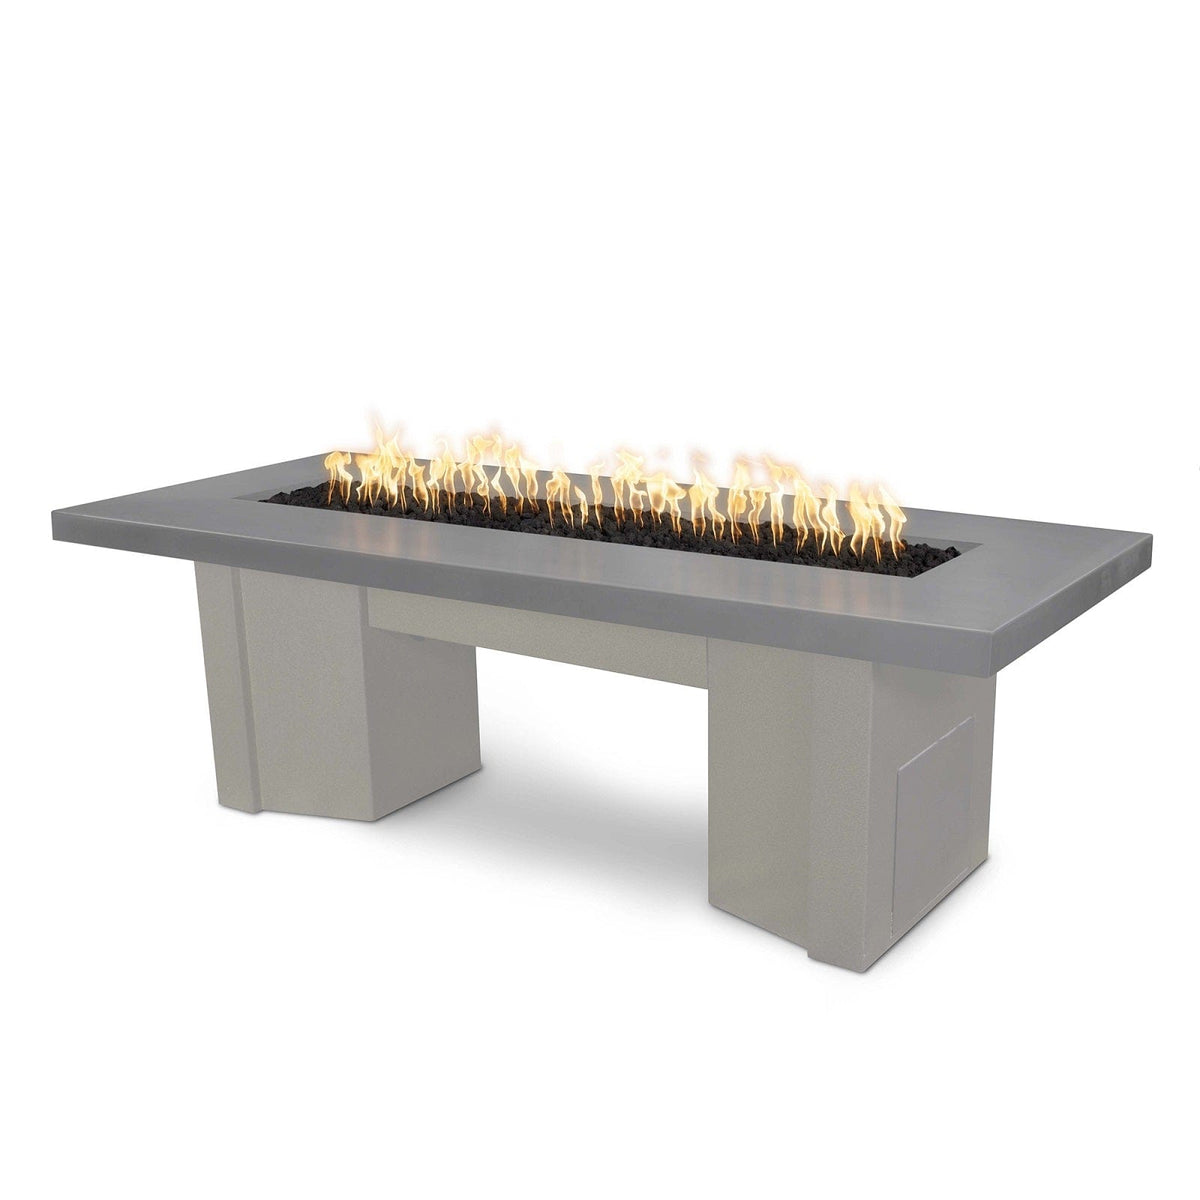 The Outdoor Plus Fire Features Natural Gray (-NGY) / Pewter Powder Coated Steel (-PEW) The Outdoor Plus 78&quot; Alameda Fire Table Smooth Concrete in Liquid Propane - 12V Electronic Ignition / OPT-ALMGFRC78E12V-LP